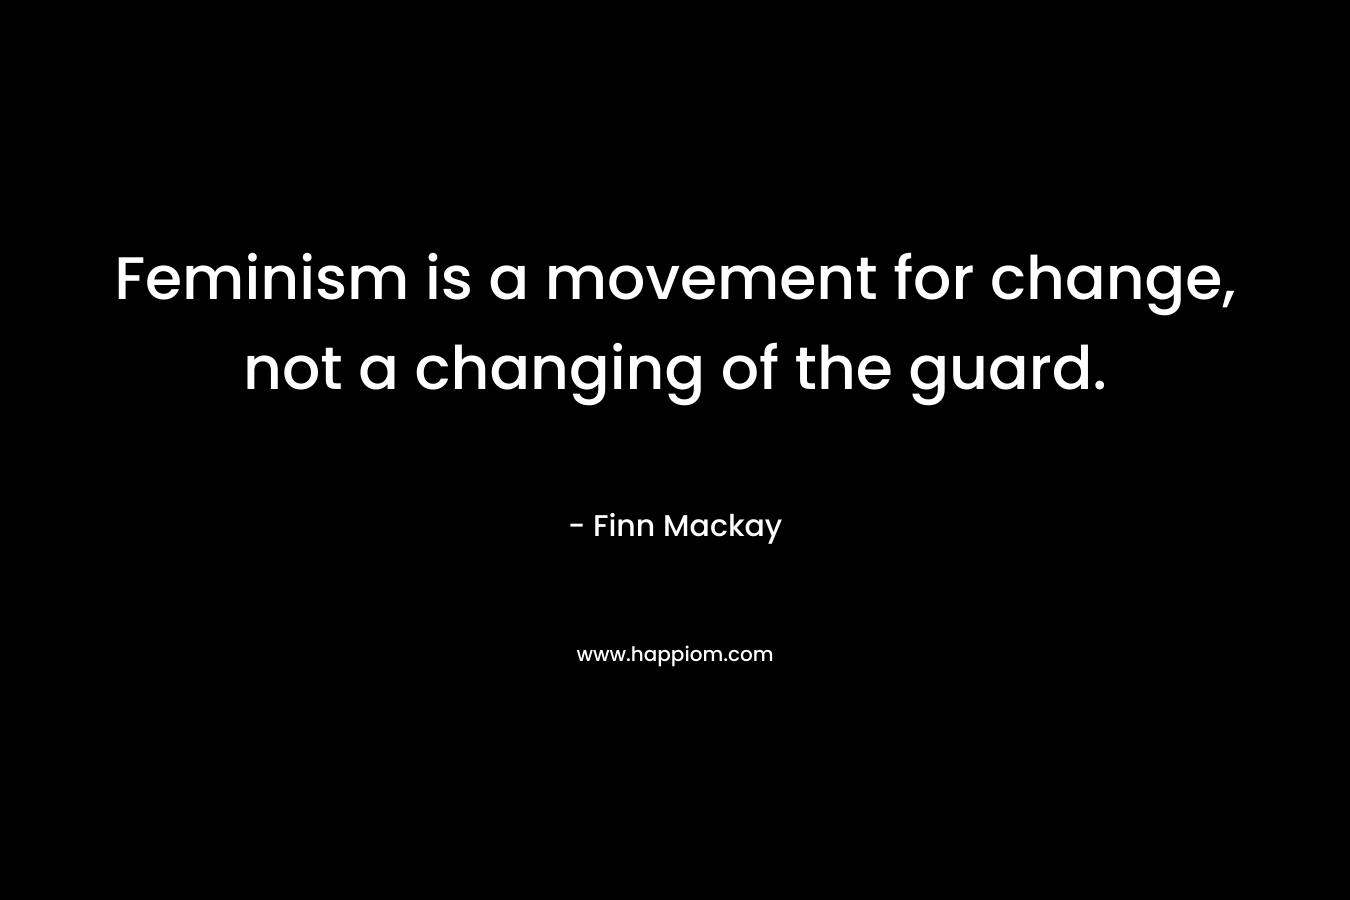 Feminism is a movement for change, not a changing of the guard.